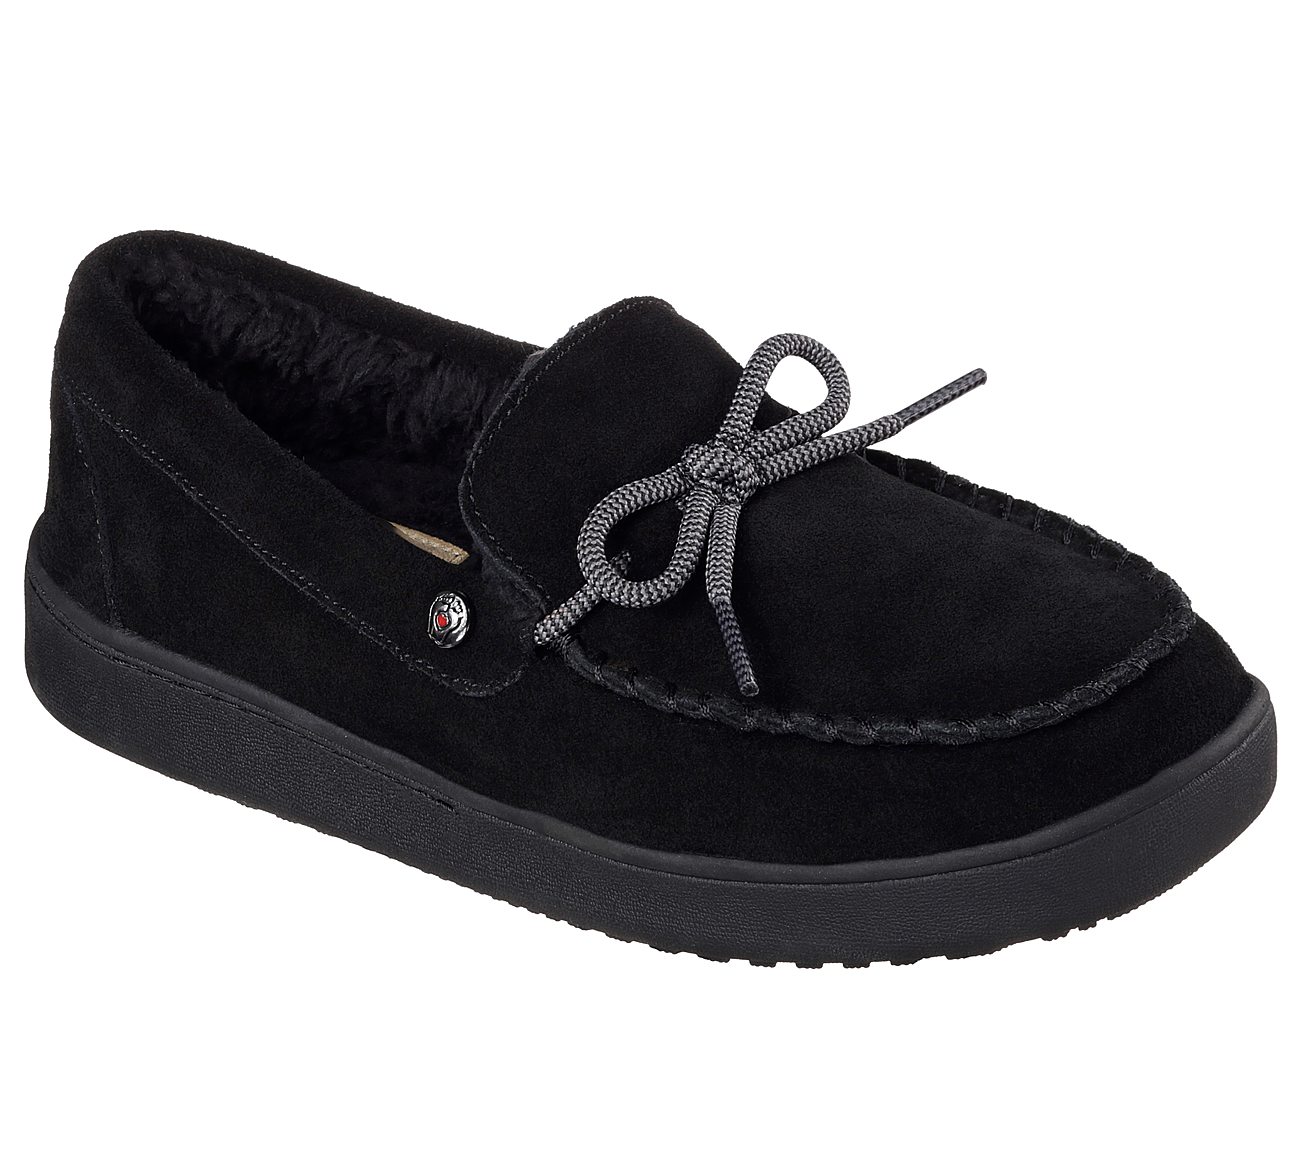 Buy SKECHERS BOBS Cozy High - Camp Fire BOBS Shoes